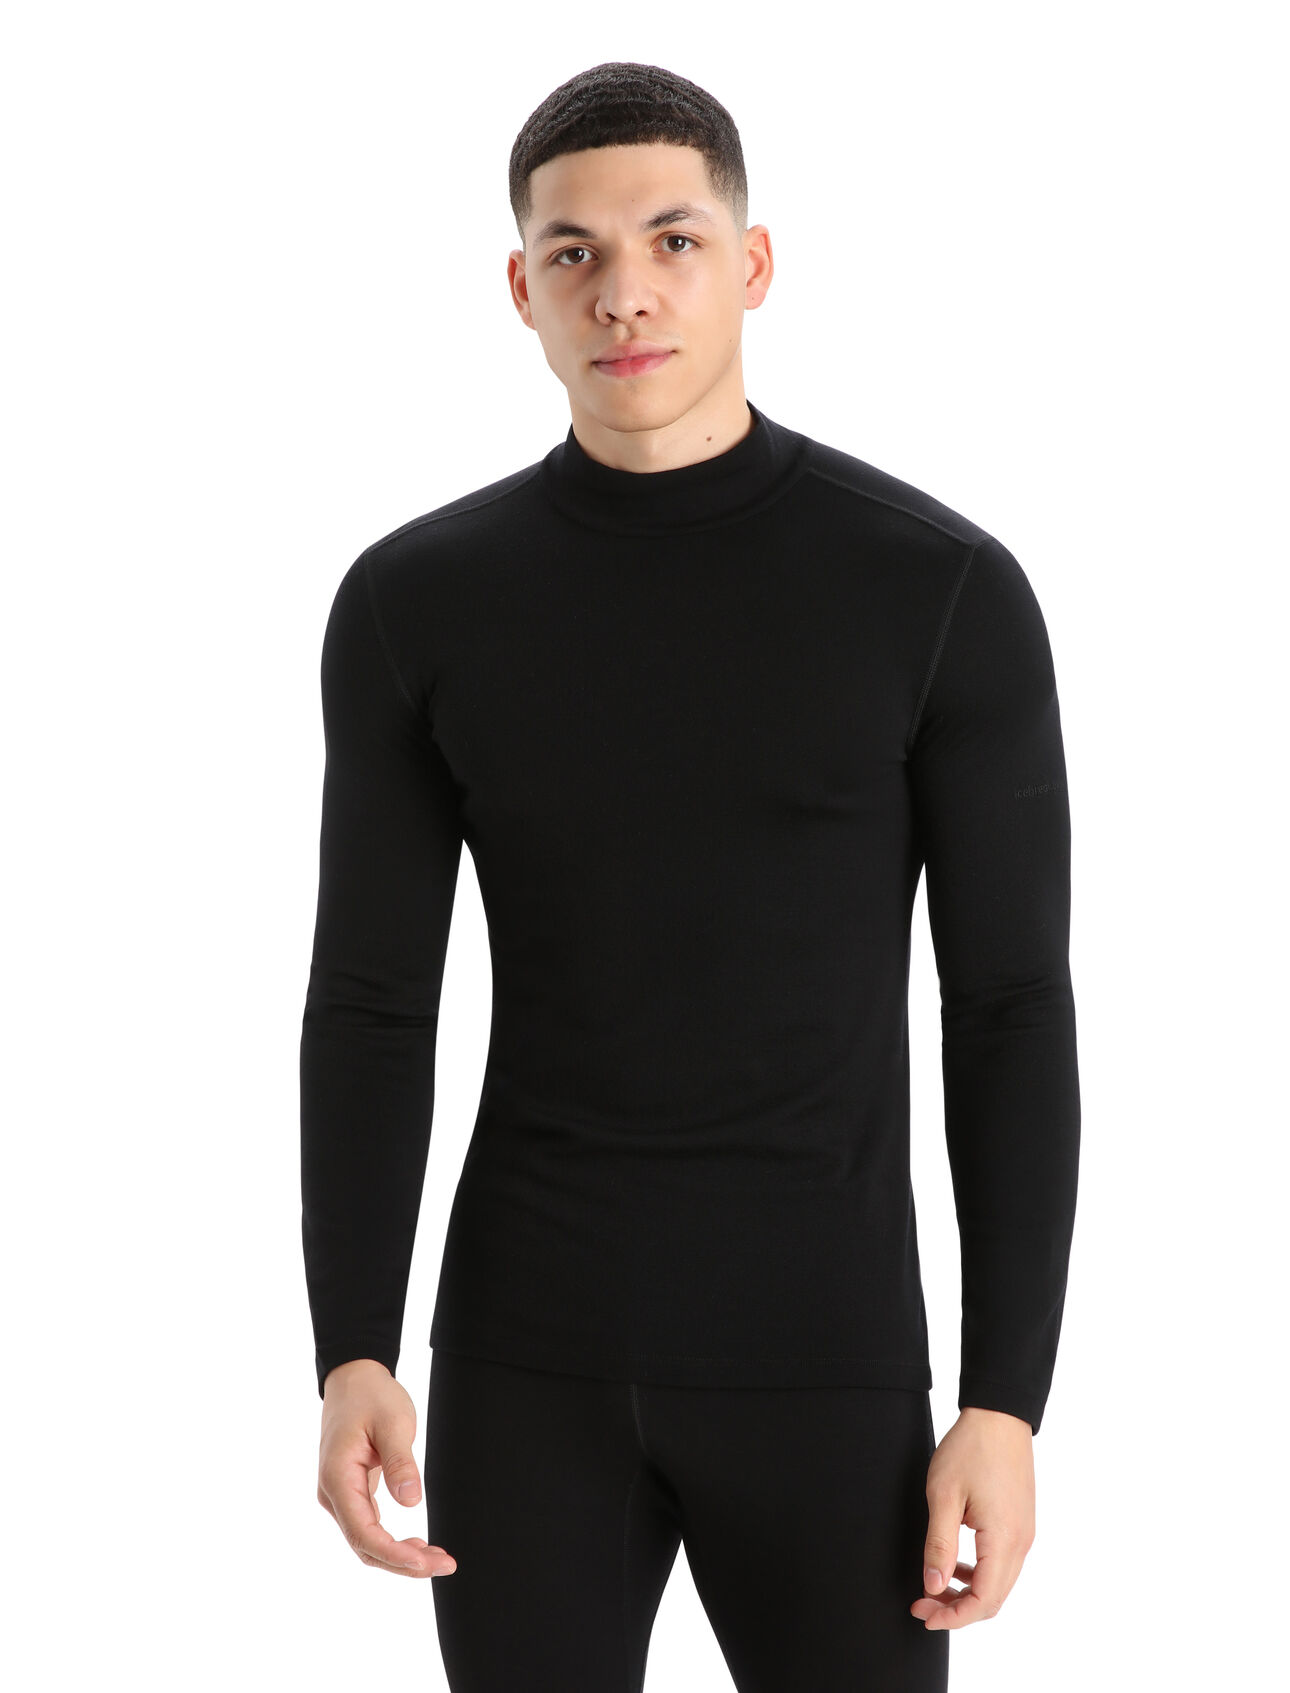 Mens Merino 260 Tech Long Sleeve Turtleneck Thermal Top An incredibly warm merino base layer for the coldest months of the year, the 260 Tech Long Sleeve Turtleneck is a go-to piece for winter layering—ideal for skiing, snowshoeing and other cold-weather pursuits.